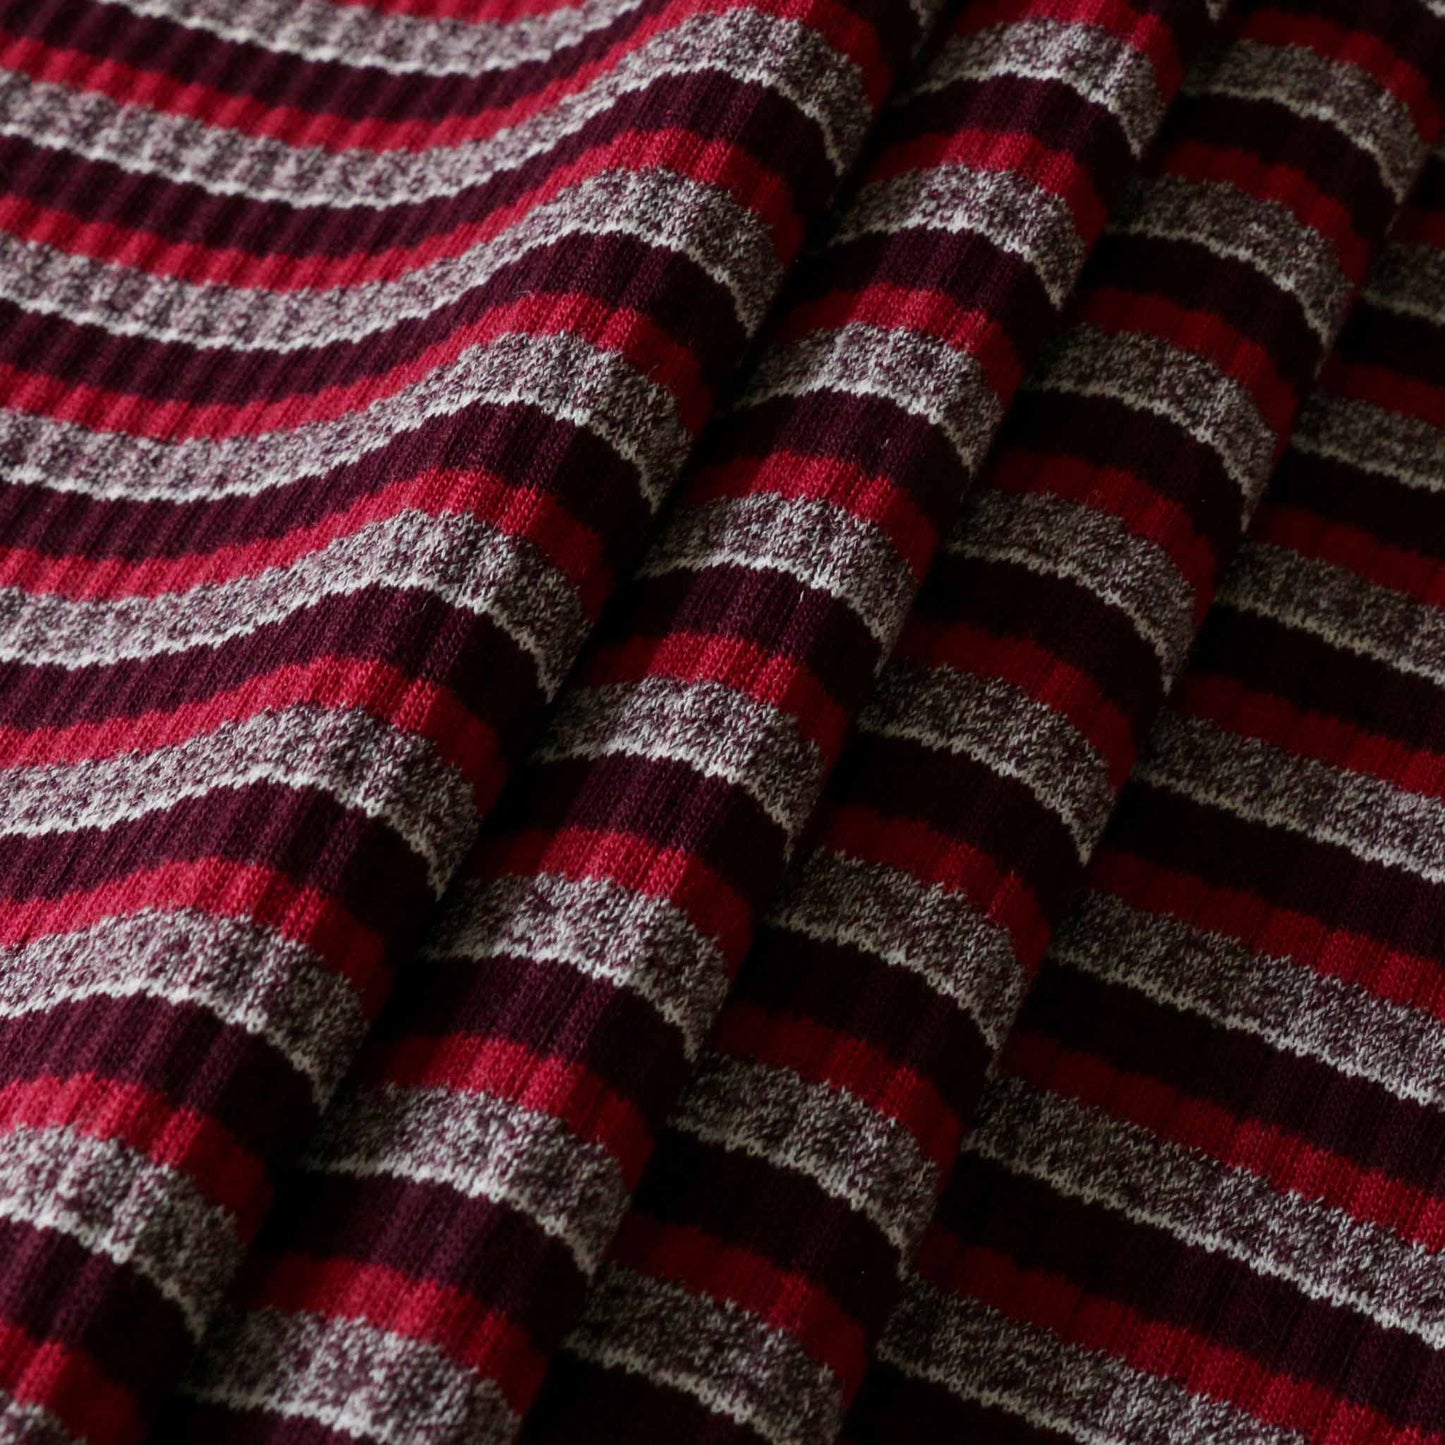 striped rib jersey knit dressmaking fabric with maroon pink and grey stripe design